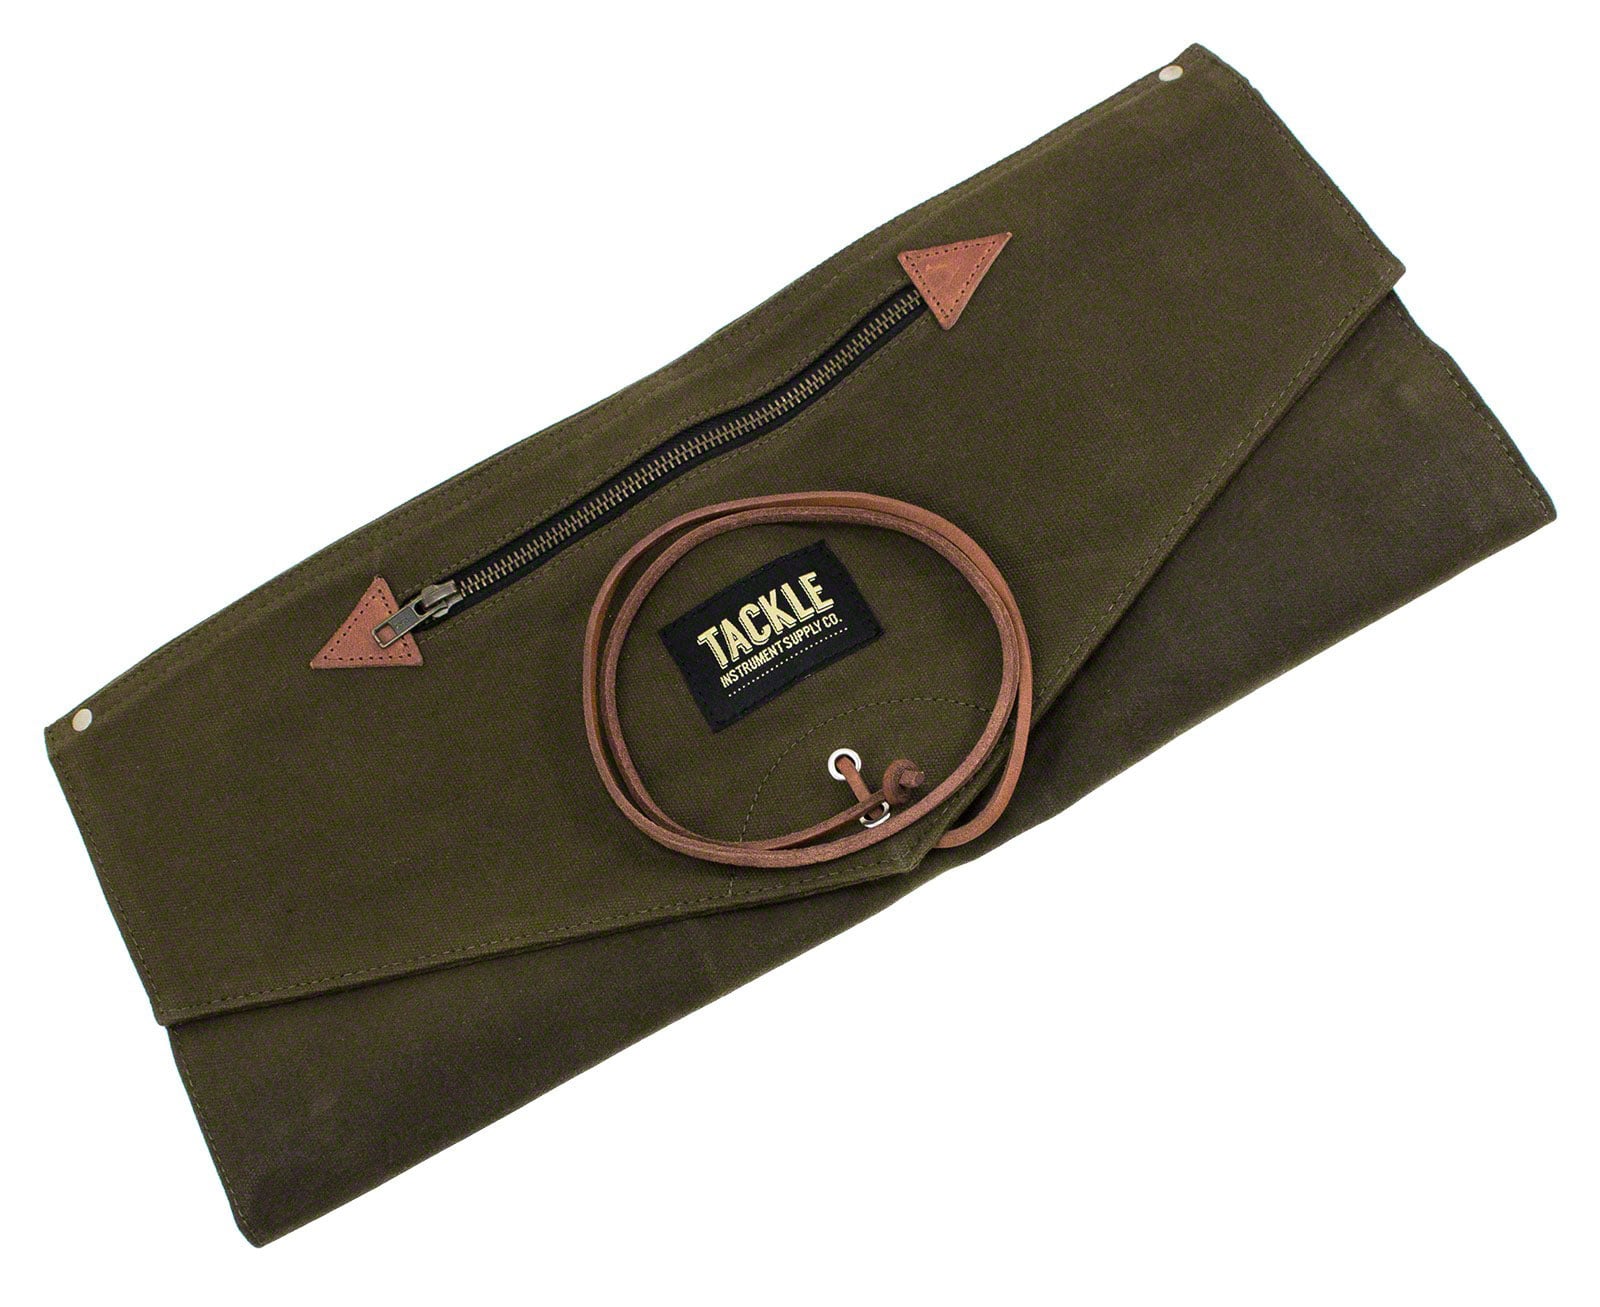 TACKLE INSTRUMENTS ROLL UP SAC BAGUETTE WAXED CANVAS - VERT